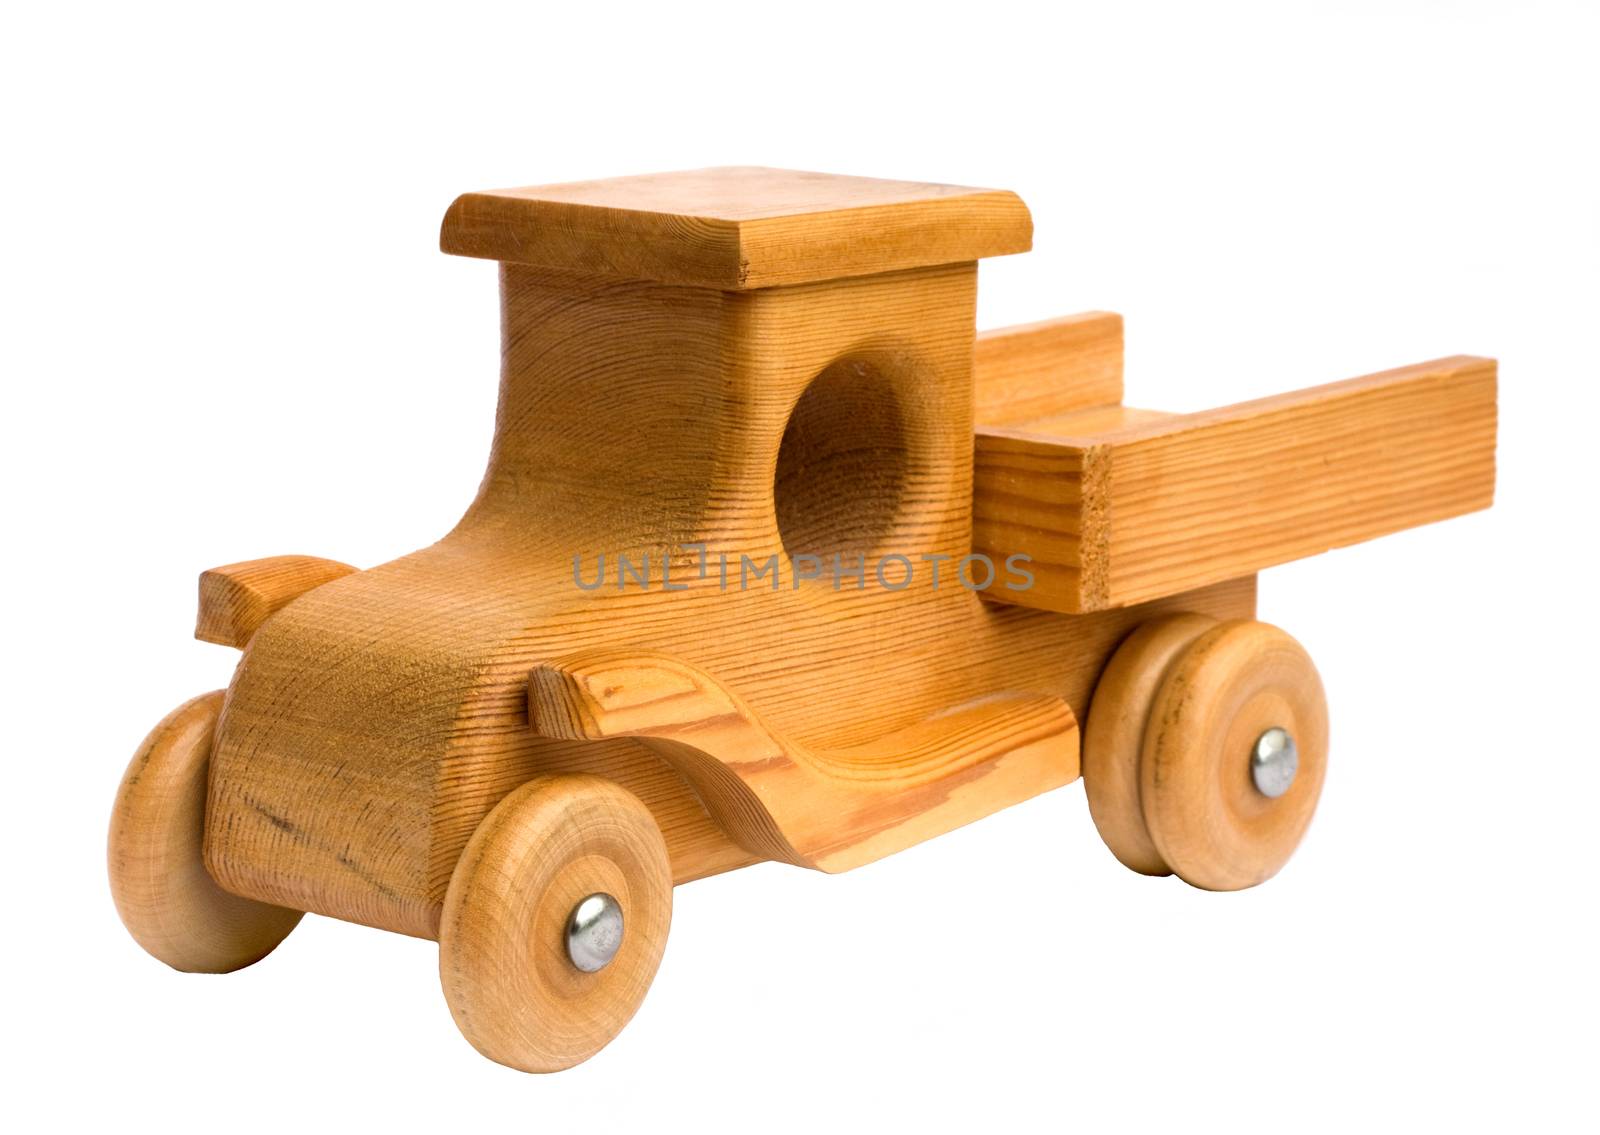 Wooden truck arriving by kavring